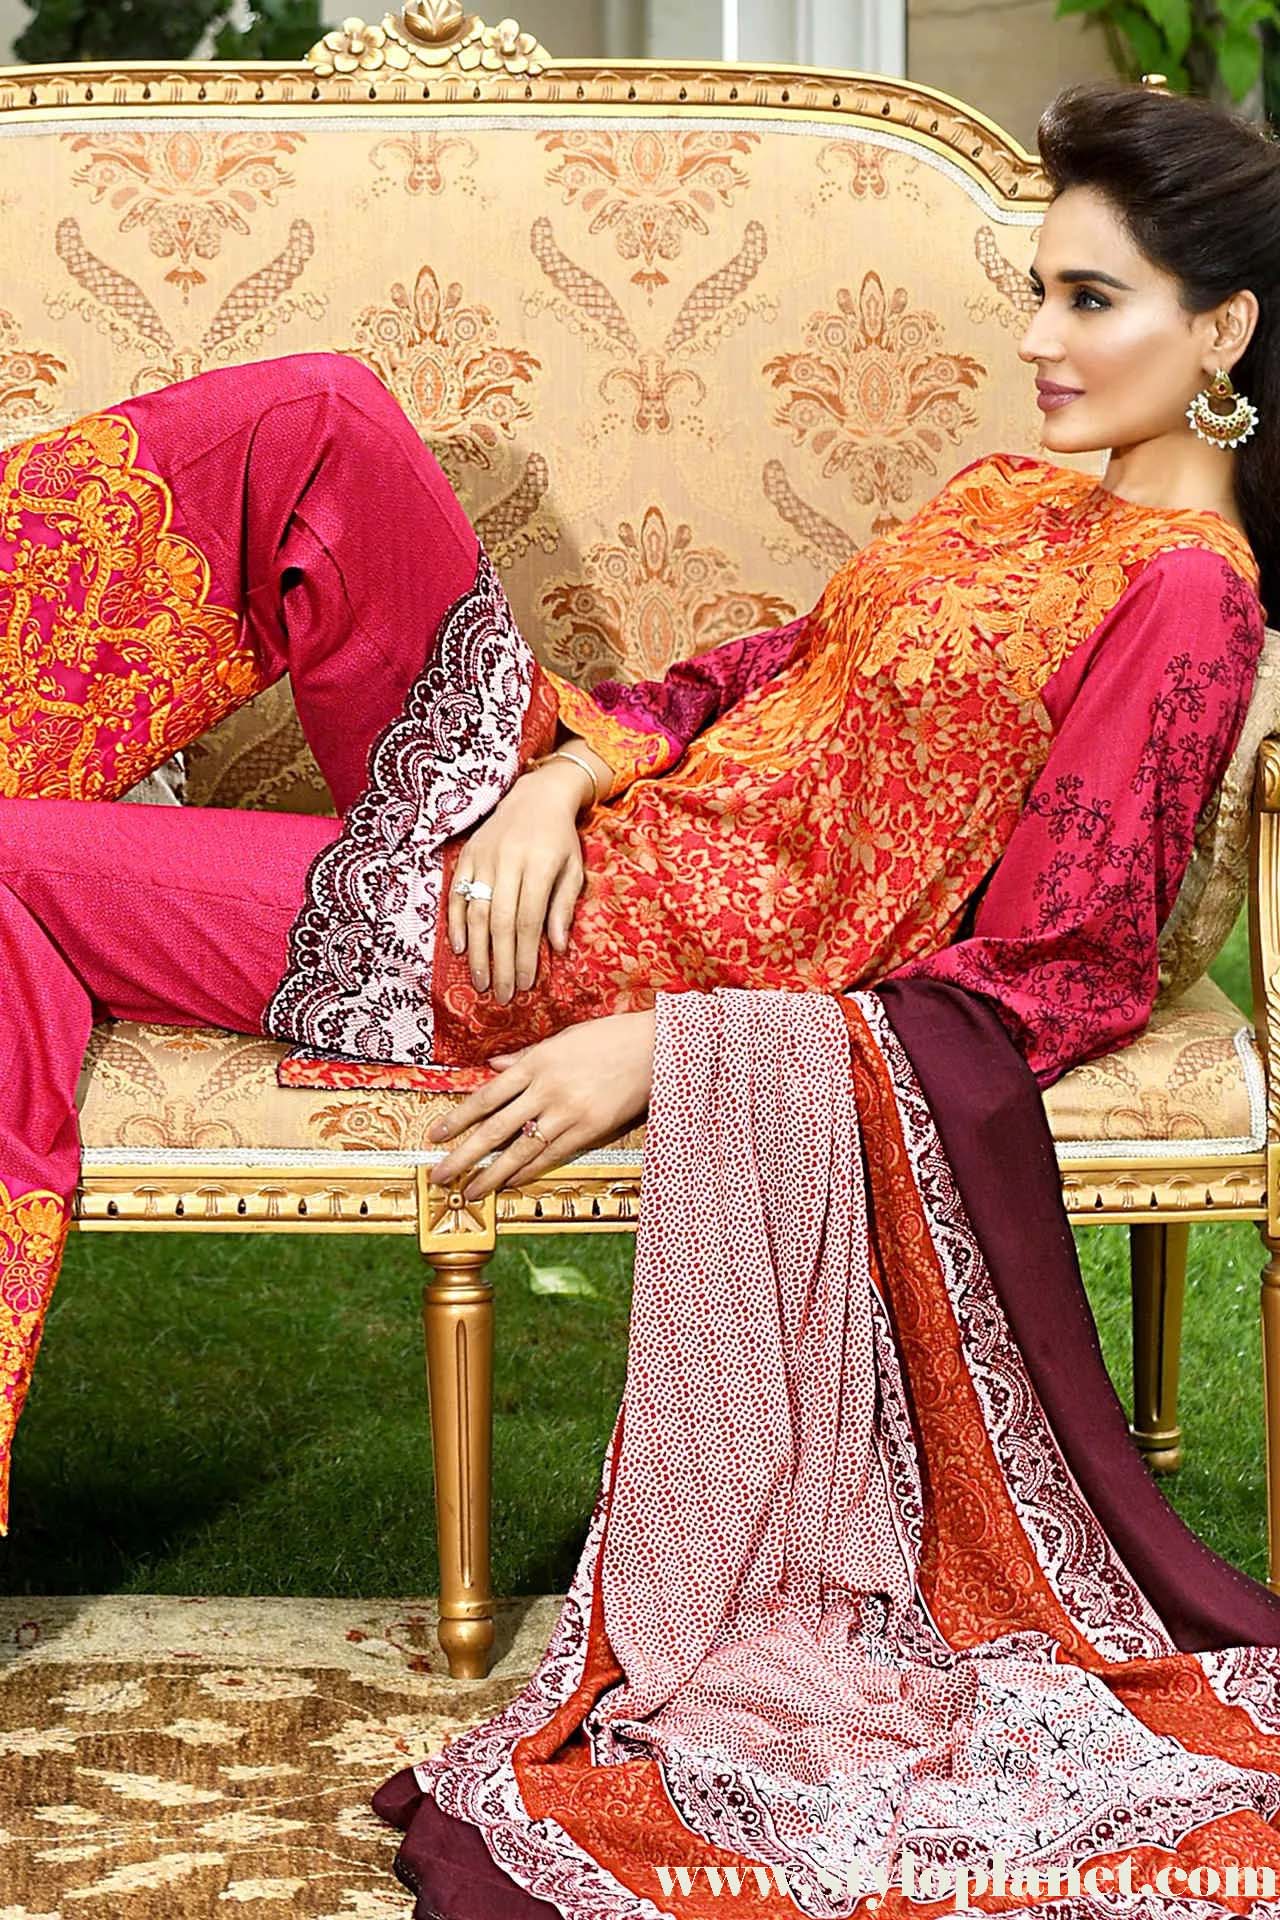 house-of-ittehad-winter-german-linen-2016-collection-12